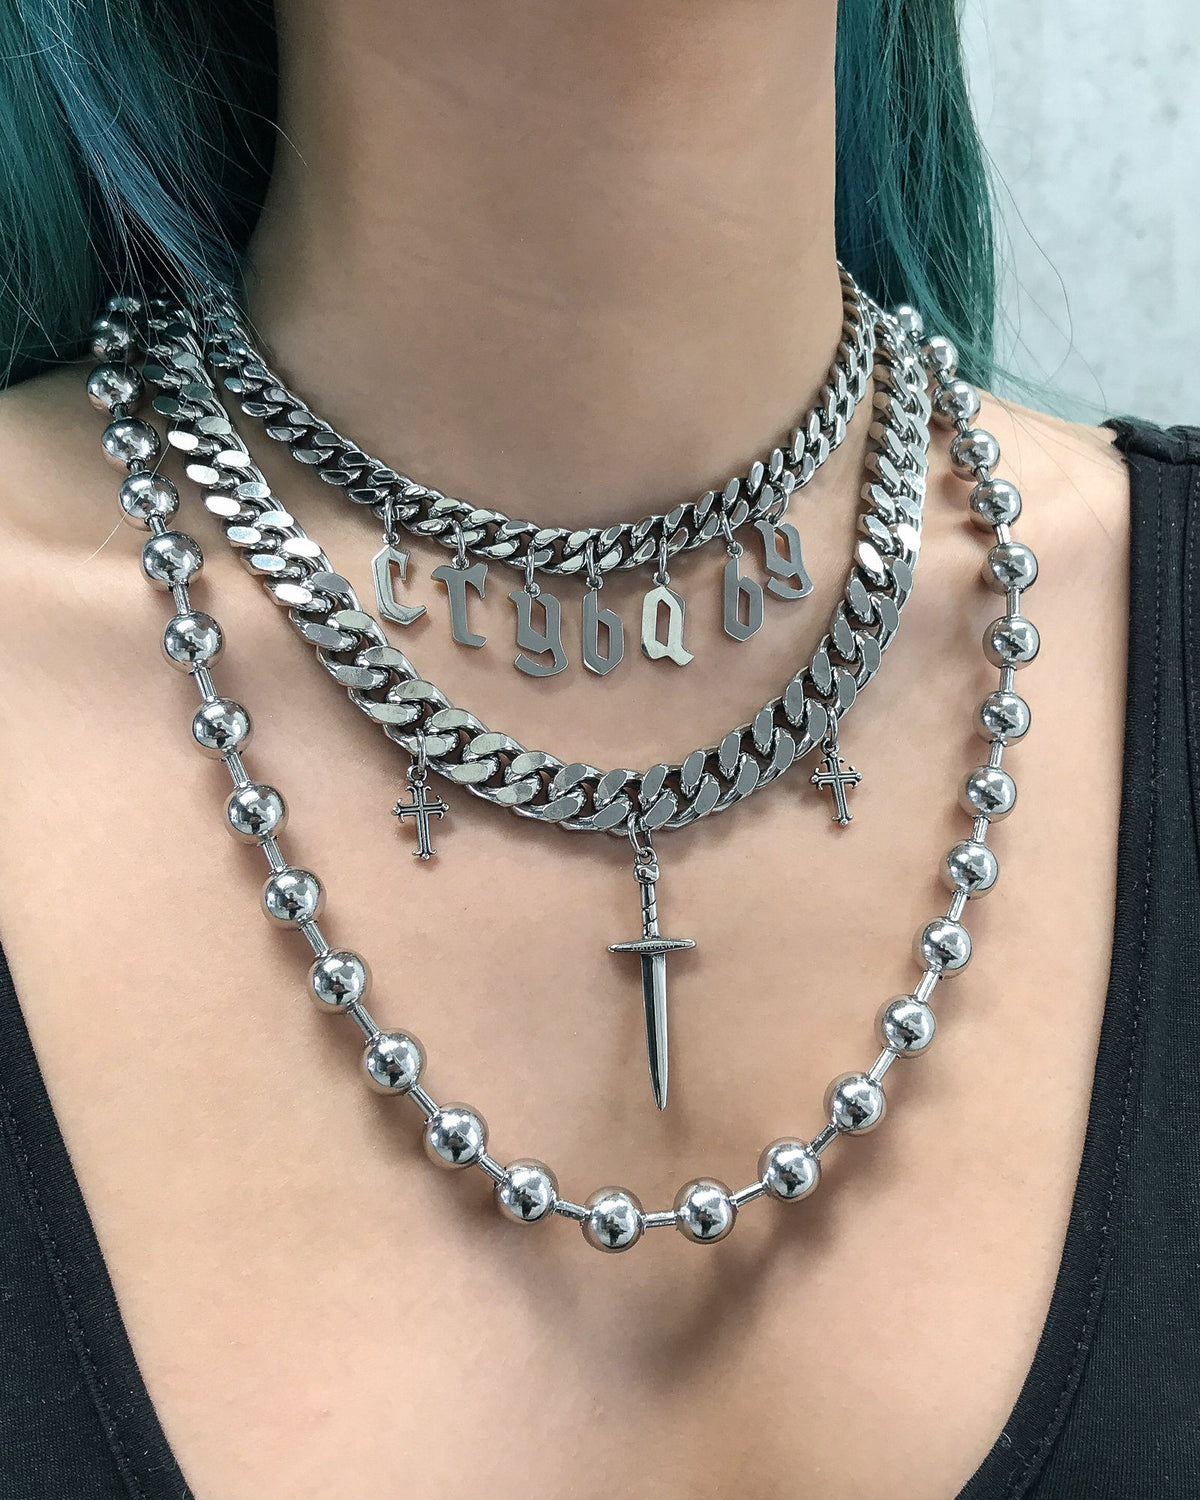 grunge jewellery necklace stack for women